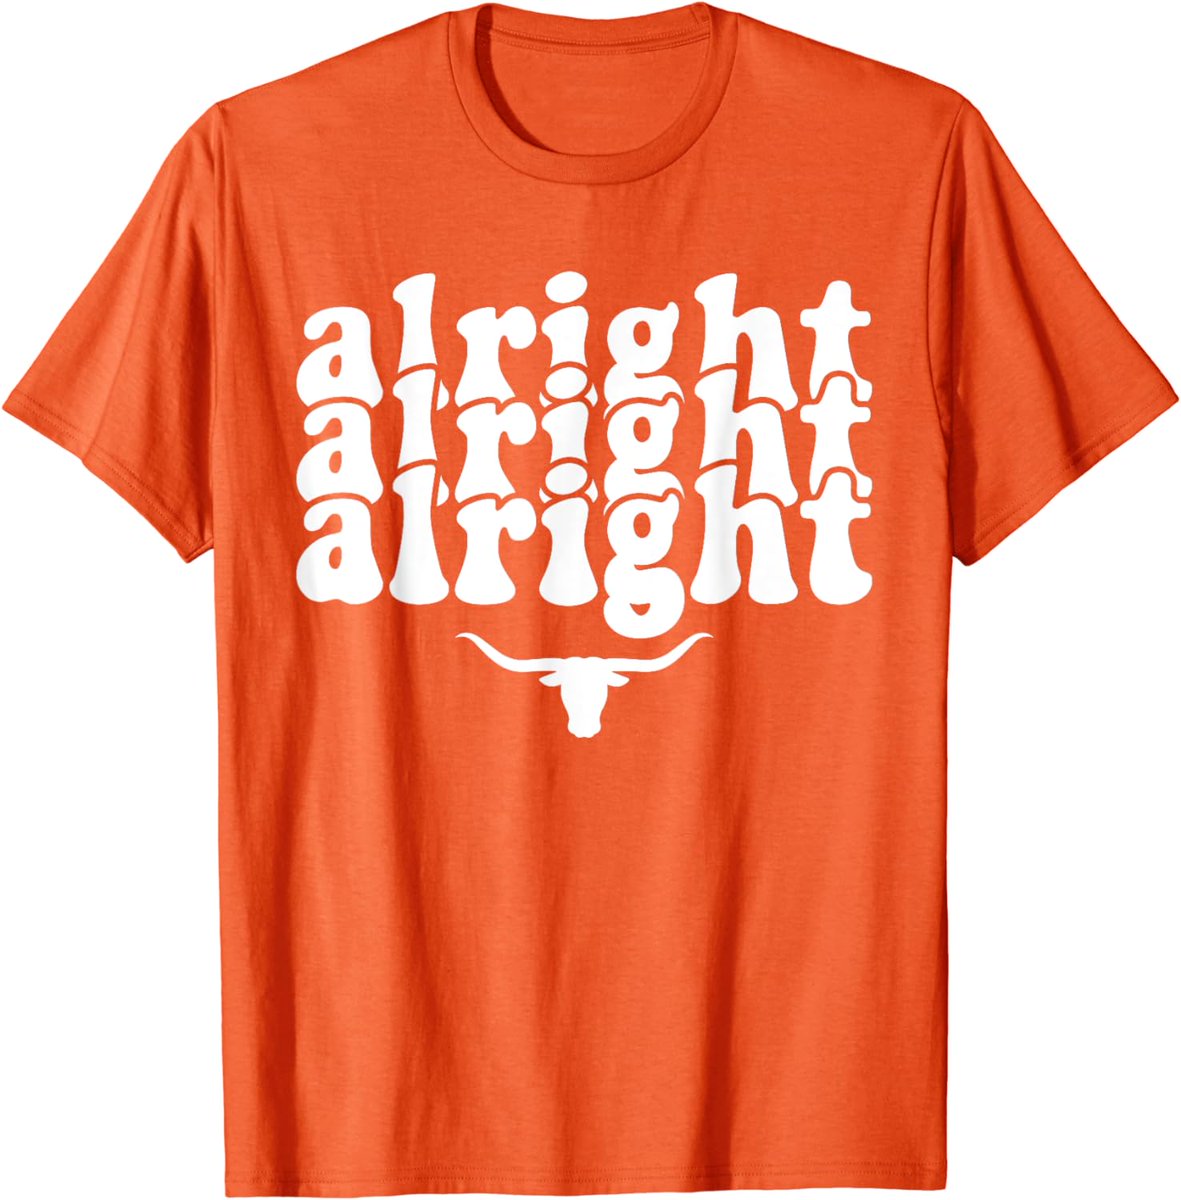 Creativity has no limits and no end
Available here ↳🔥 : amzn.to/3Wz1RzF
Alright Texas Pride State USA Longhorn Bull T-Shirt